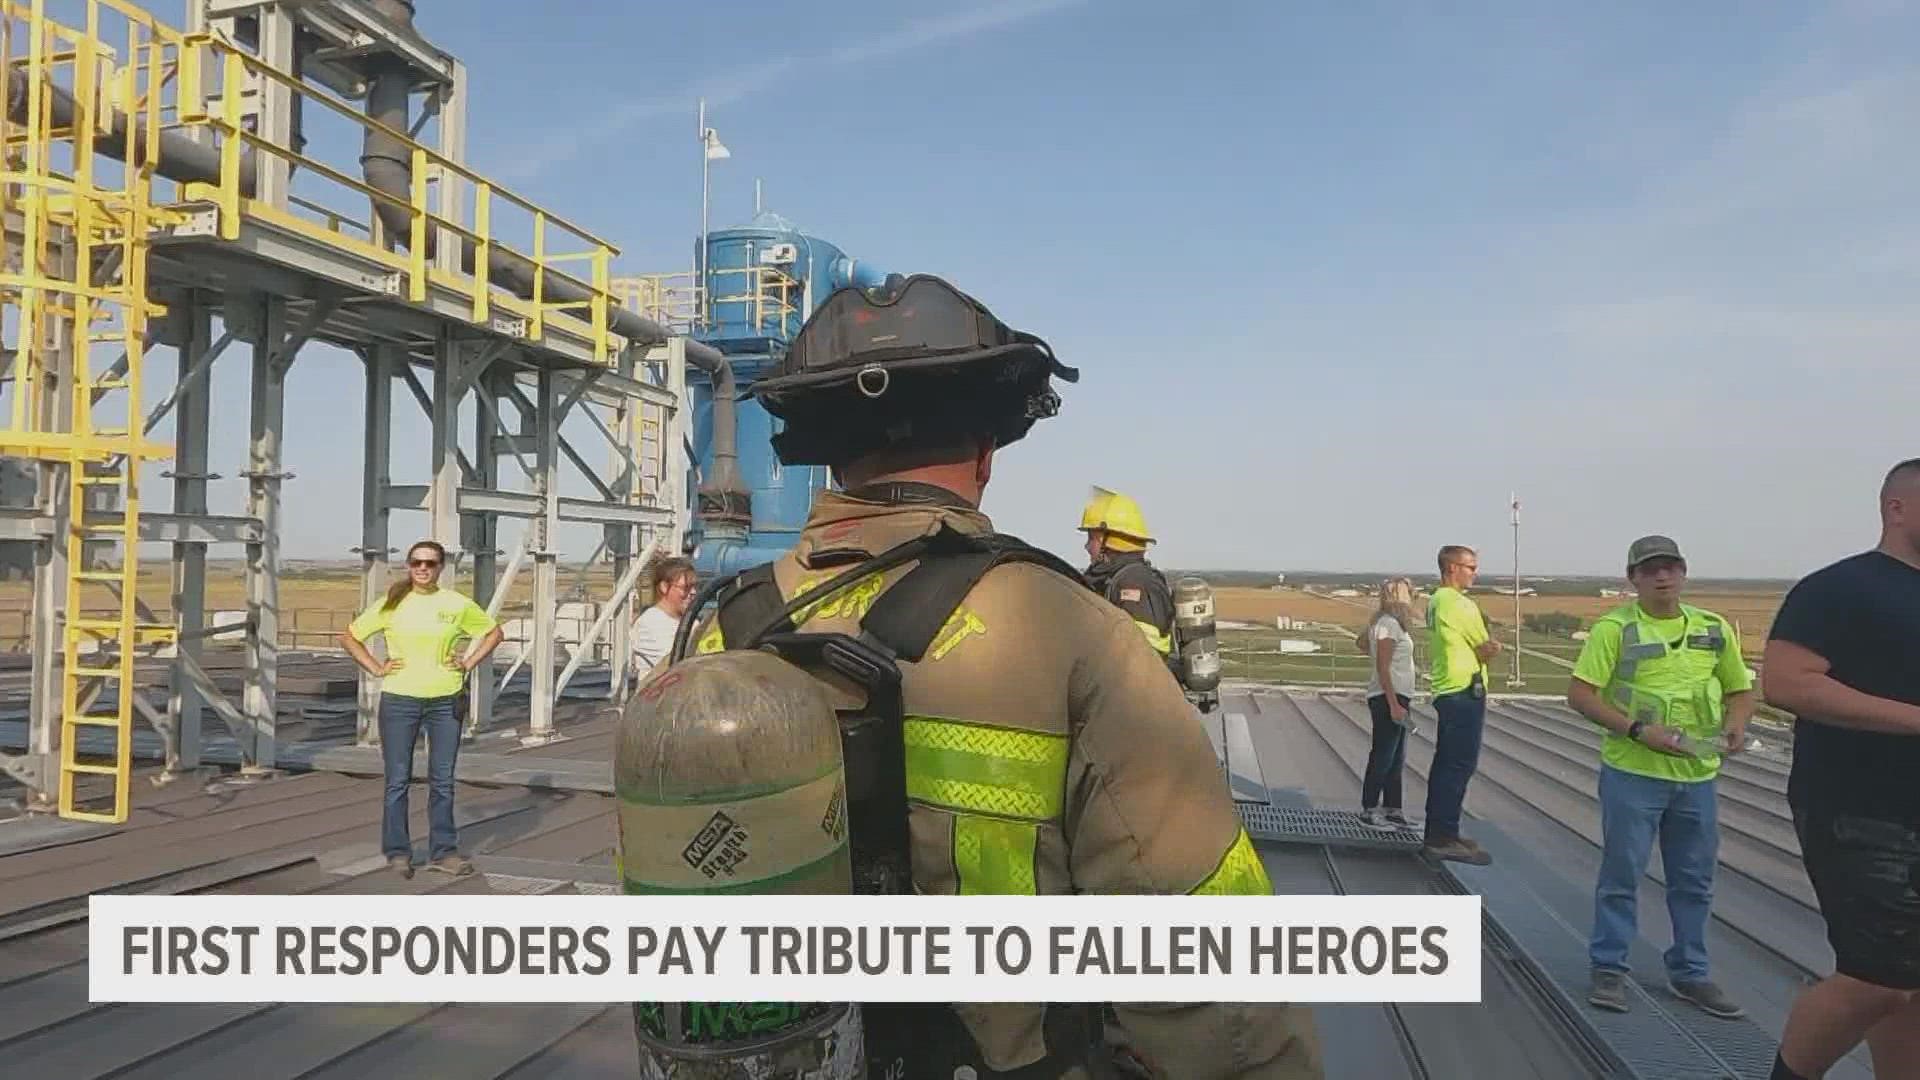 More than 100 first responders climbed the Verbio Nevada tower six times, marking the approximate height of one of the twin towers.